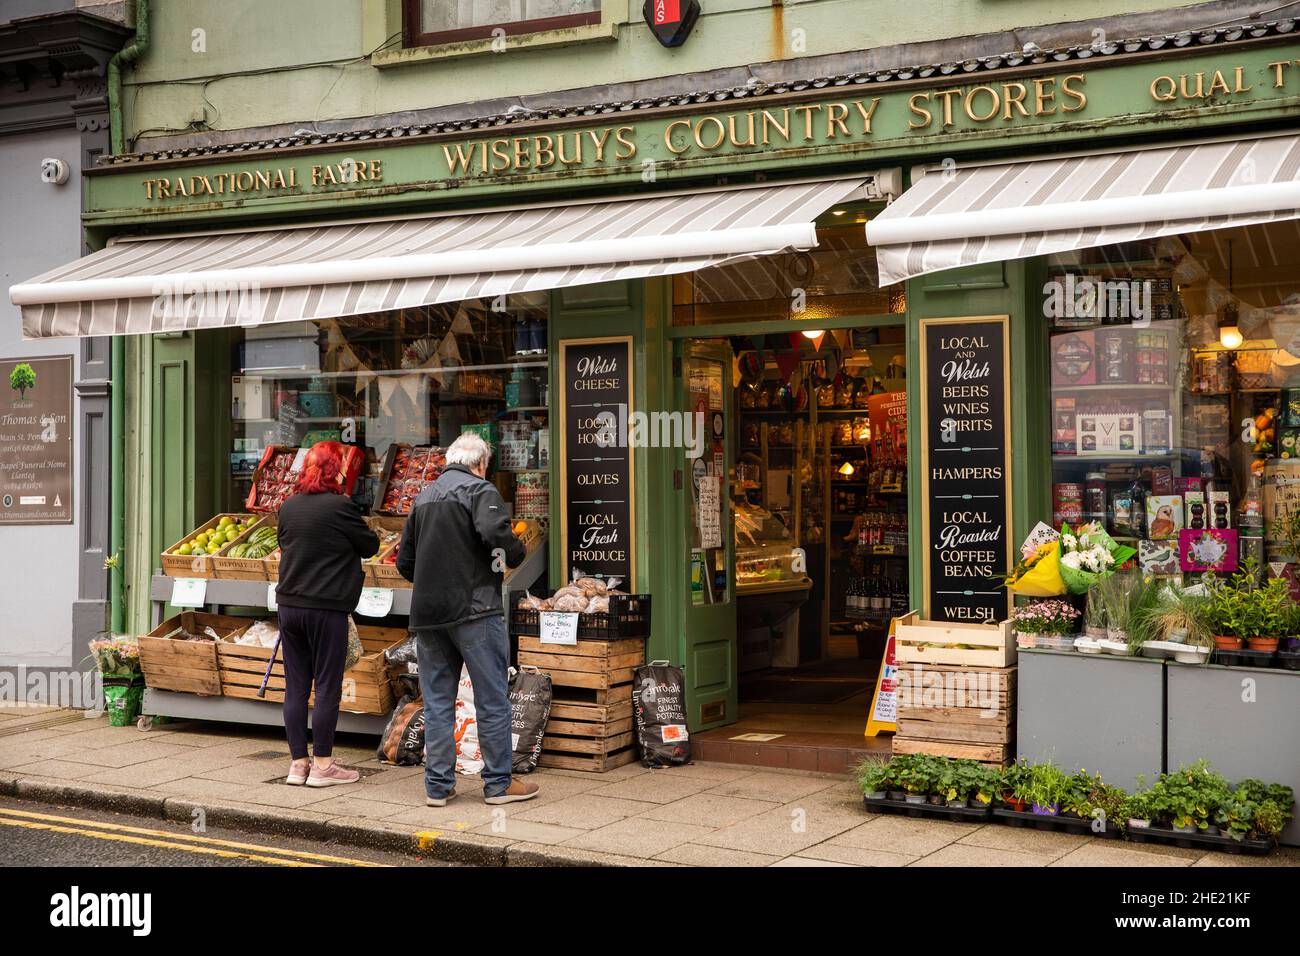 UK, Wales, Pembrokeshire, Pembroke, Main Street, Wisebuys Country Stores, traditional greengrocer’s shop Stock Photo